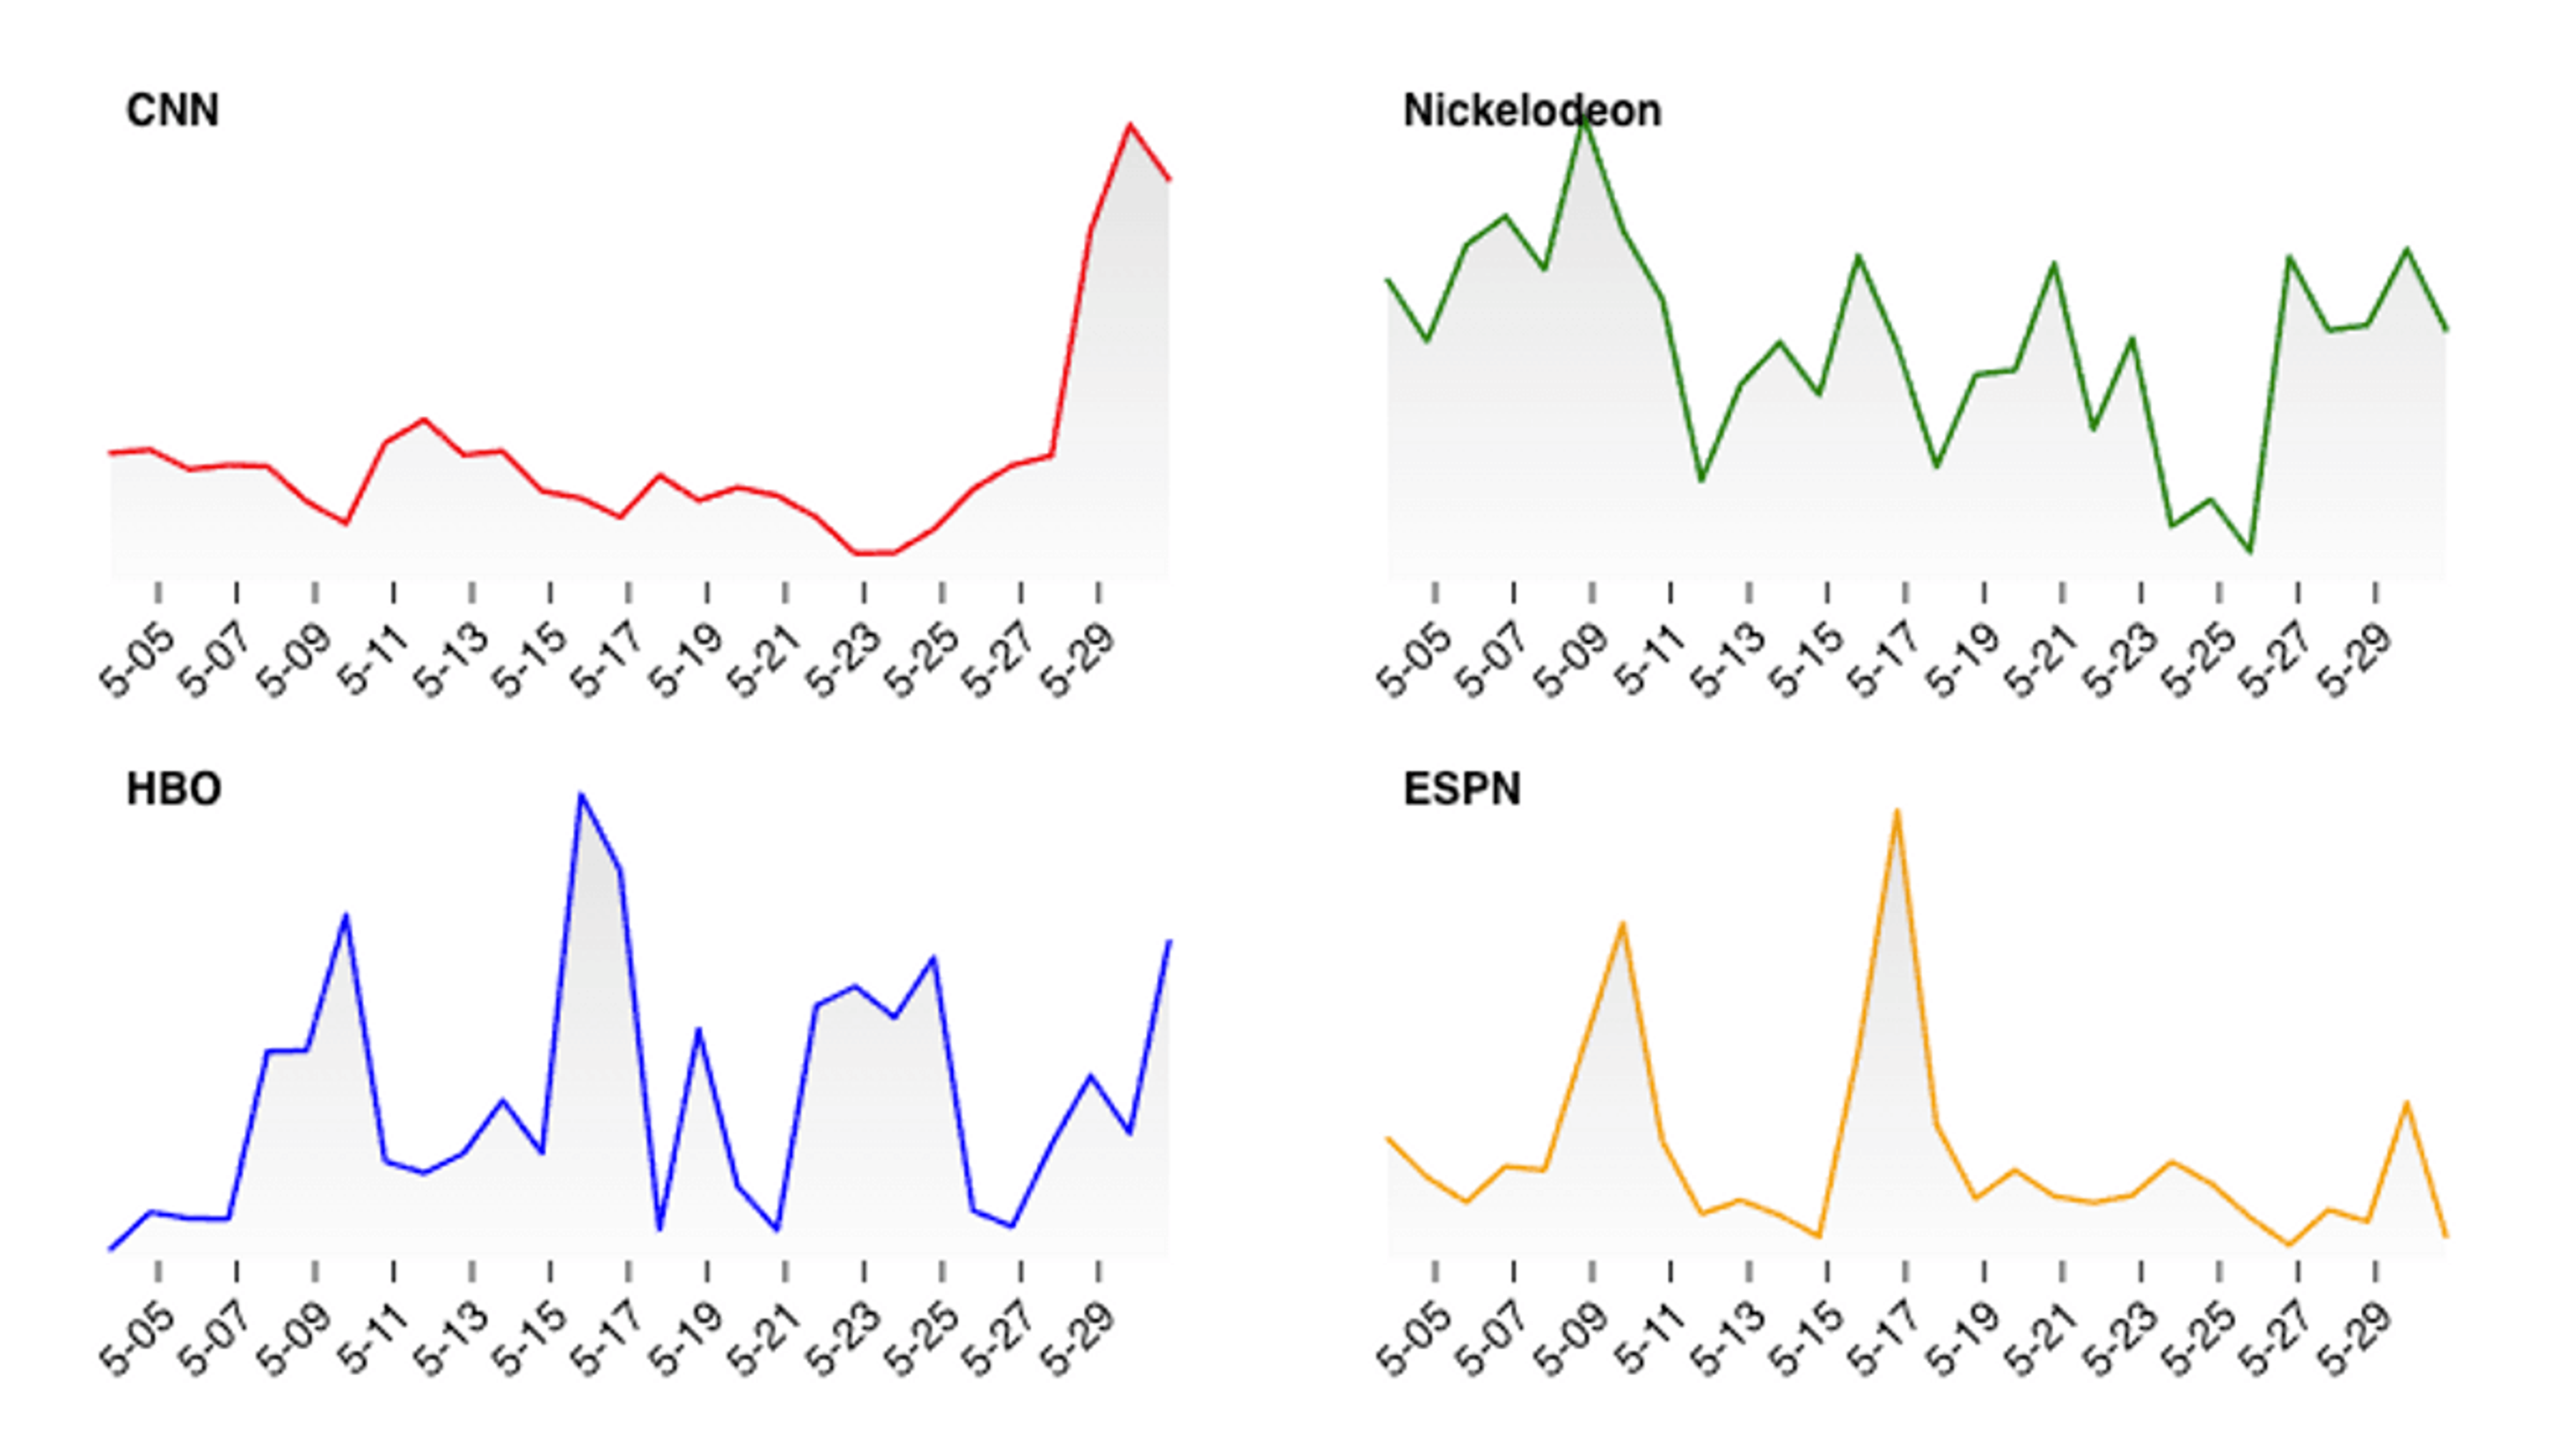 Collection of line charts showing TV viewership trends across popular TV networks.